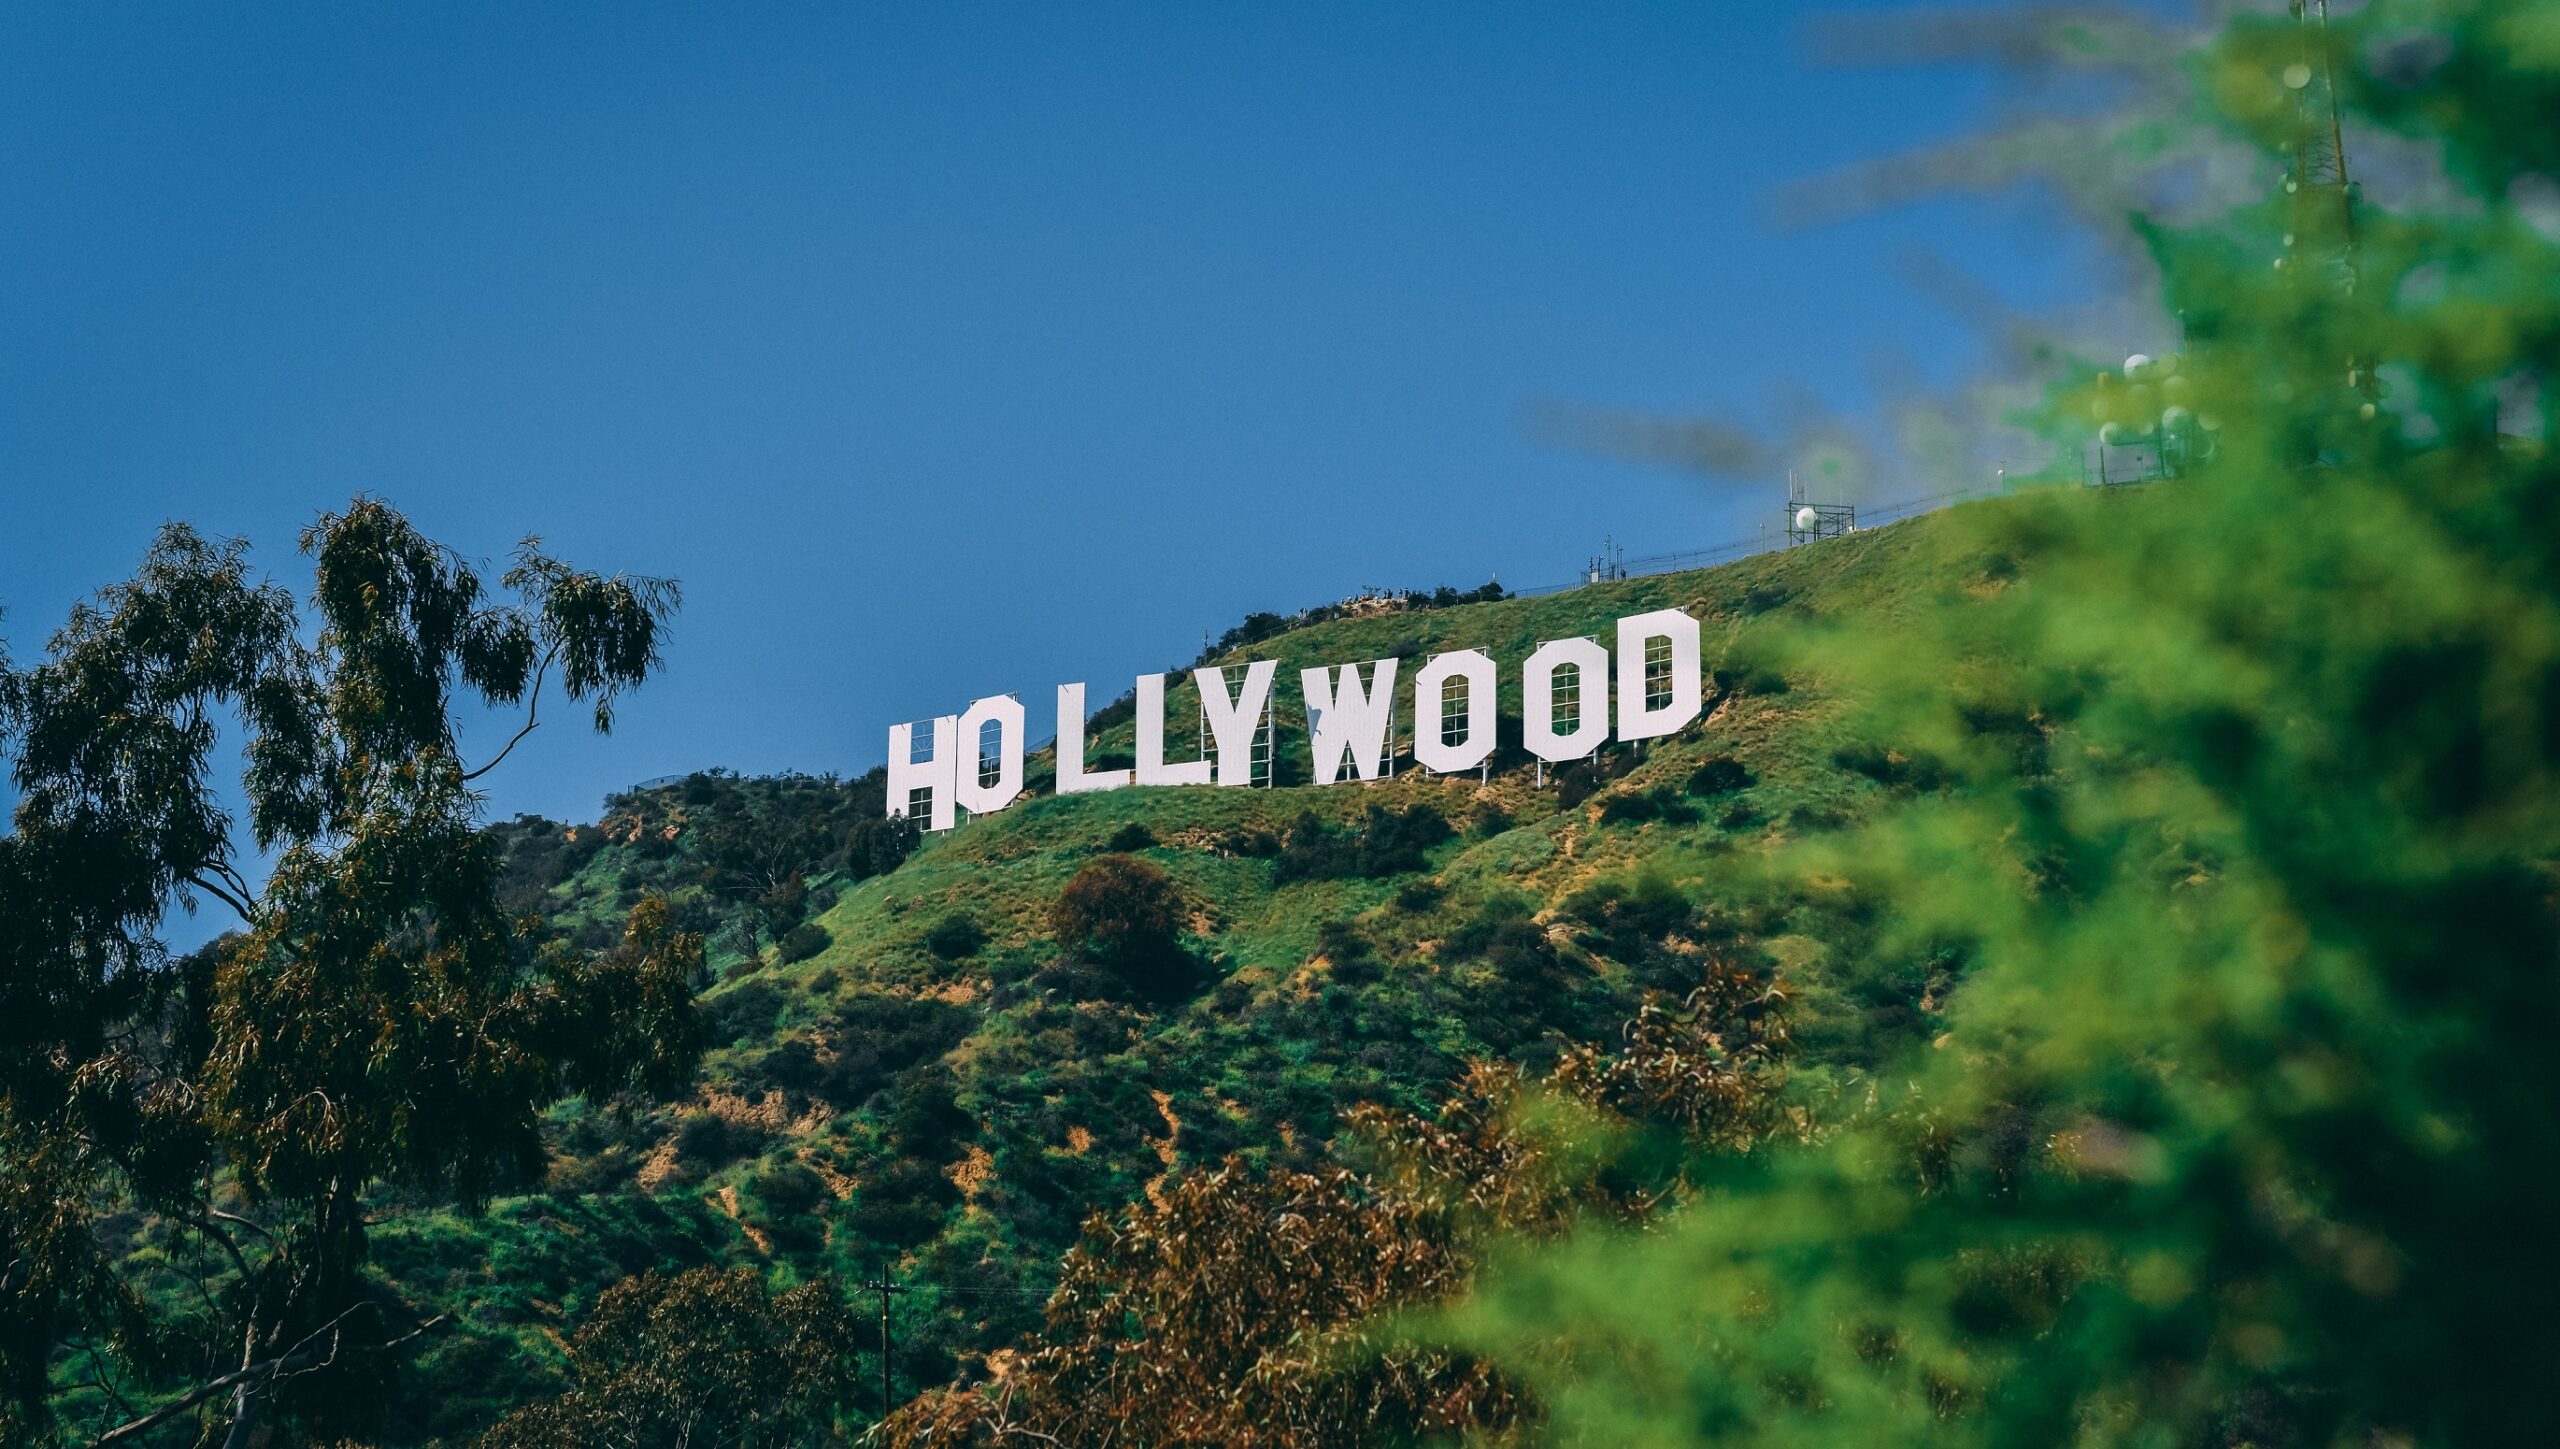 https://www.pexels.com/photo/hollywood-sign-2695679/